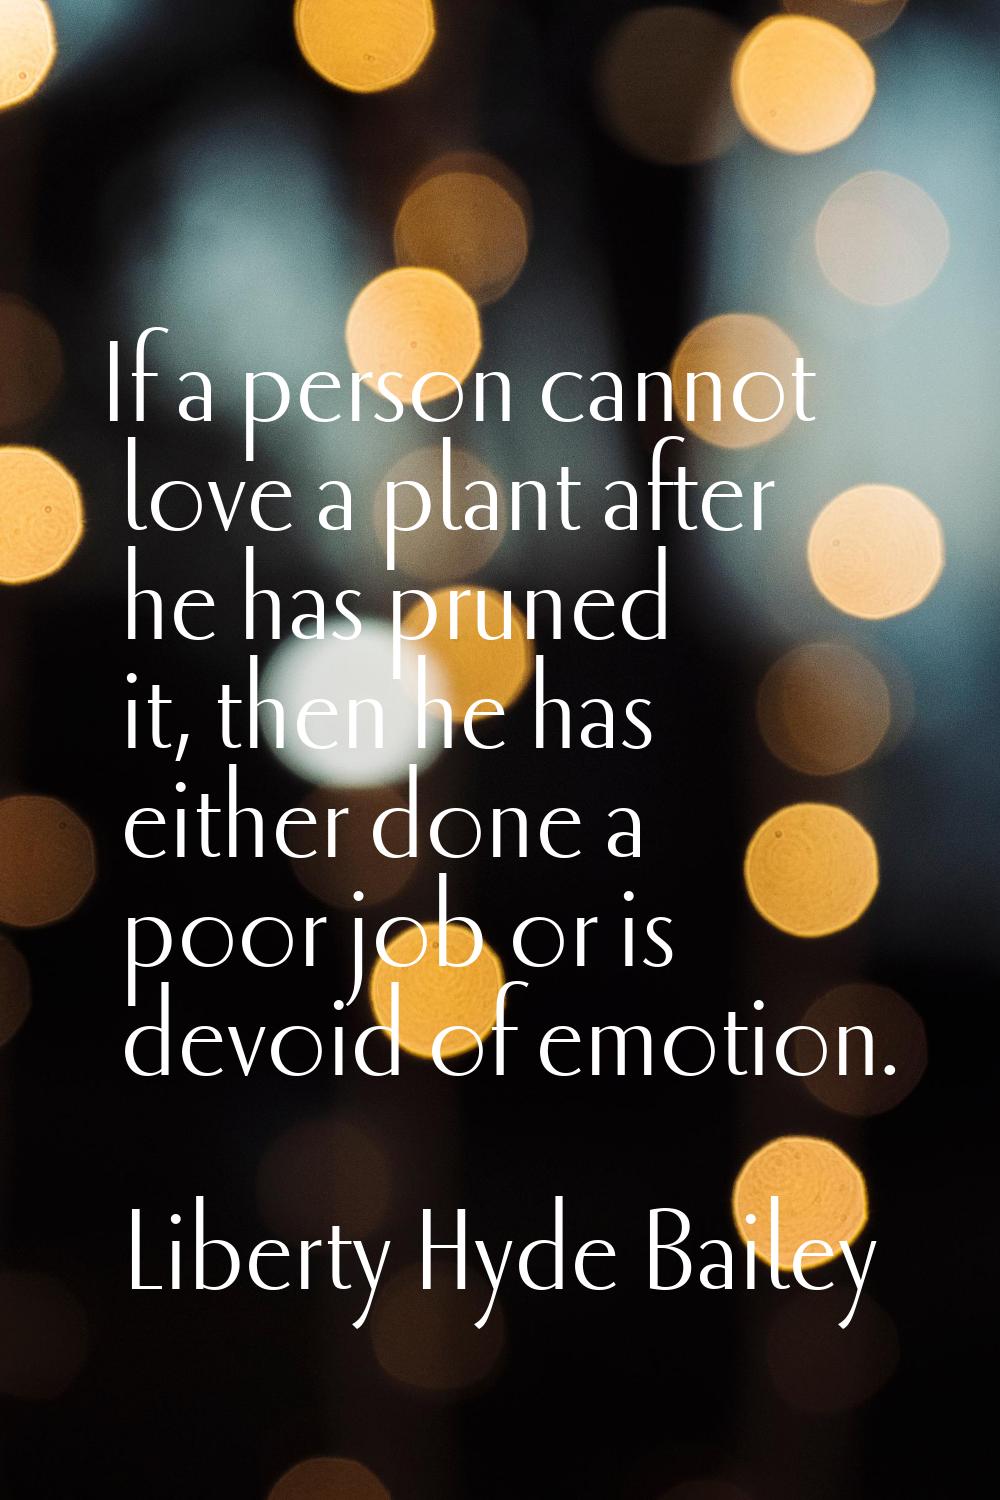 If a person cannot love a plant after he has pruned it, then he has either done a poor job or is de